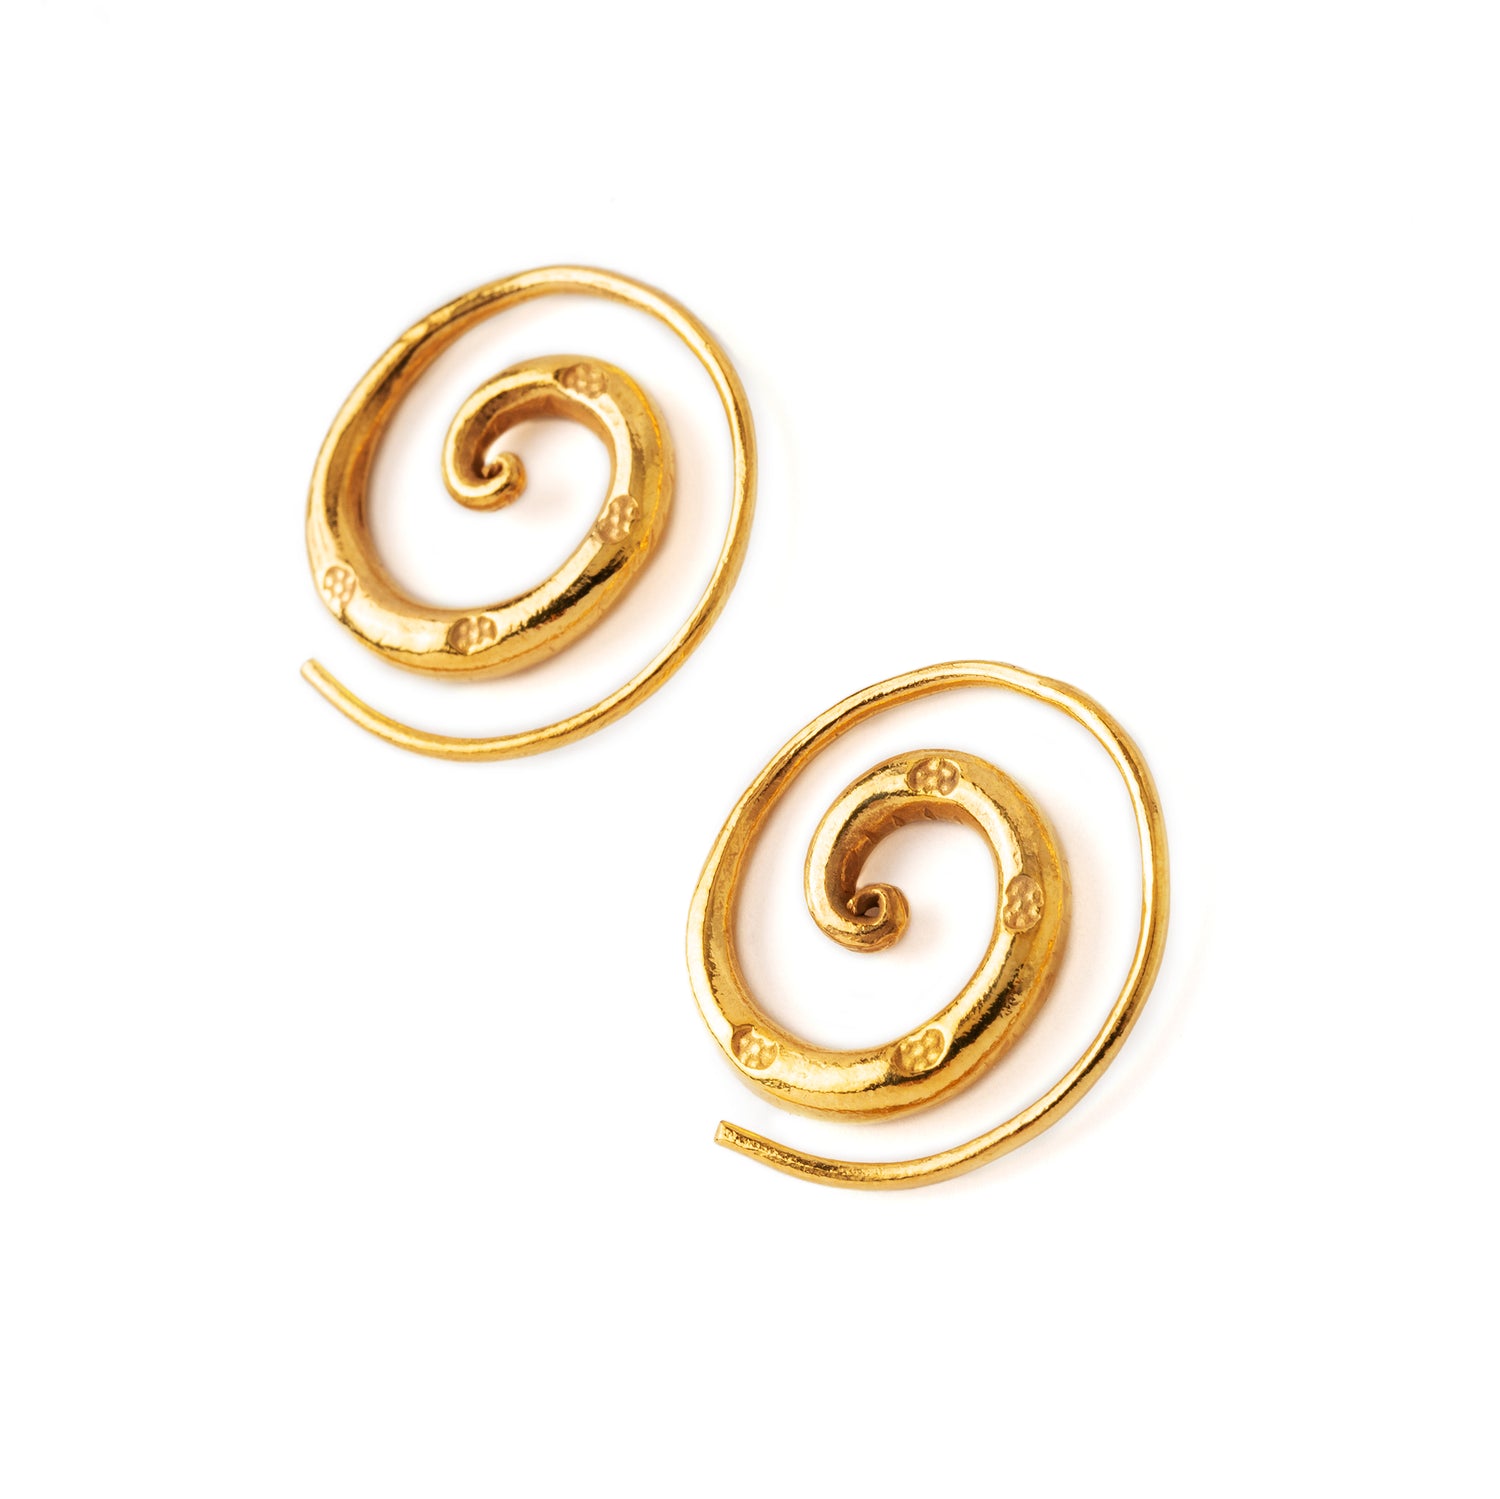 Stamped Gold Spiral Earrings side view